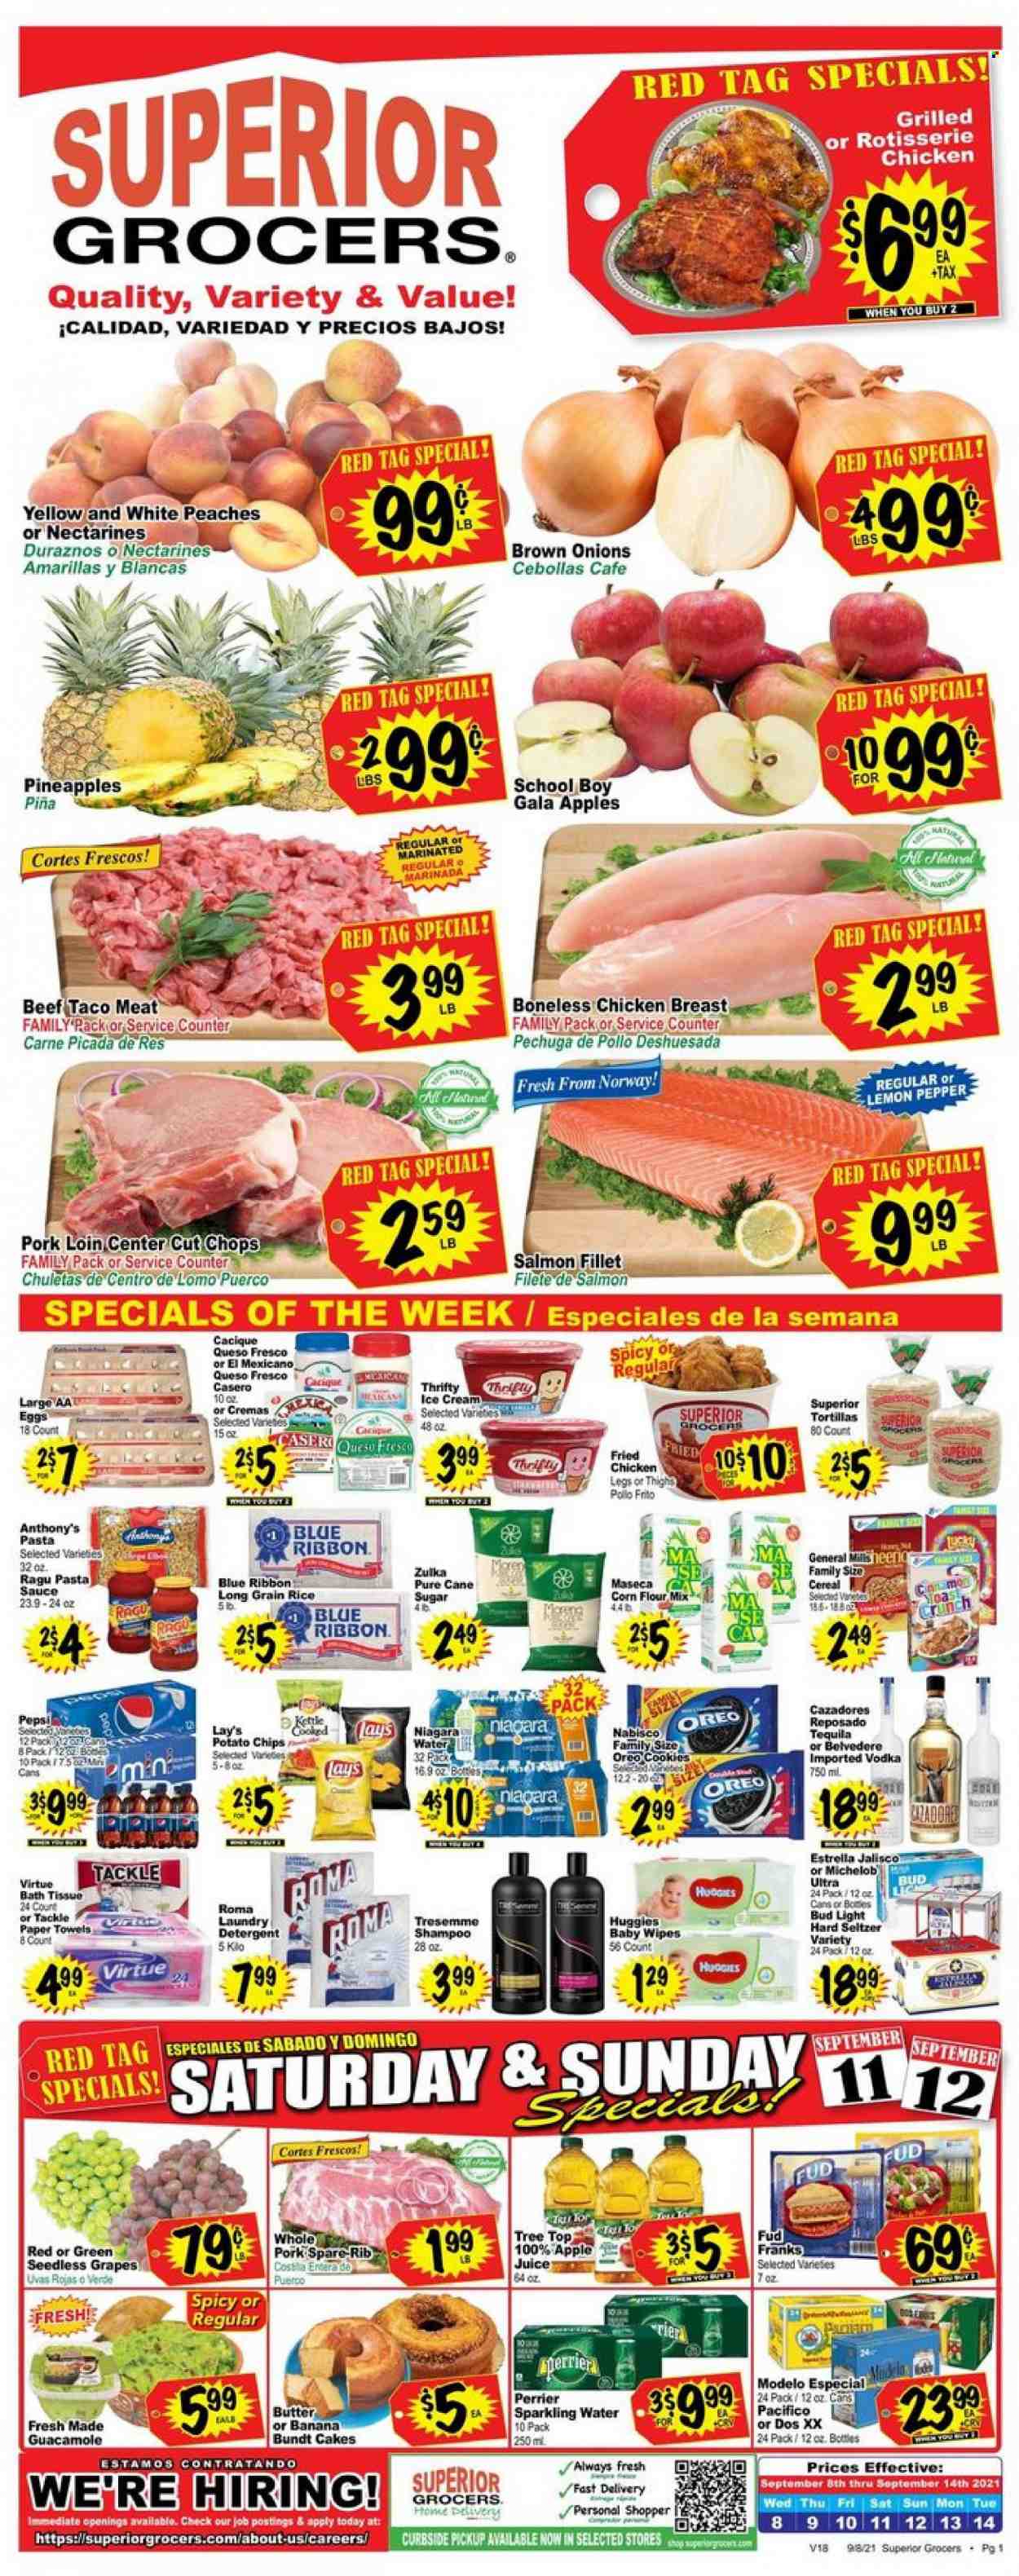 thumbnail - Superior Grocers Flyer - 09/08/2021 - 09/14/2021 - Sales products - seedless grapes, tortillas, cake, bundt, onion, Gala, grapes, pineapple, chicken breasts, pork loin, pork meat, salmon, salmon fillet, chicken roast, pasta sauce, sauce, fried chicken, ragú pasta, guacamole, queso fresco, Oreo, eggs, butter, ice cream, cookies, potato chips, chips, Lay’s, sugar, corn flour, cereals, rice, long grain rice, ragu, apple juice, Pepsi, juice, Perrier, sparkling water, tequila, vodka, Hard Seltzer, beer, Bud Light, Modelo, laundry detergent, TRESemmé, nectarines, Michelob, peaches. Page 1.